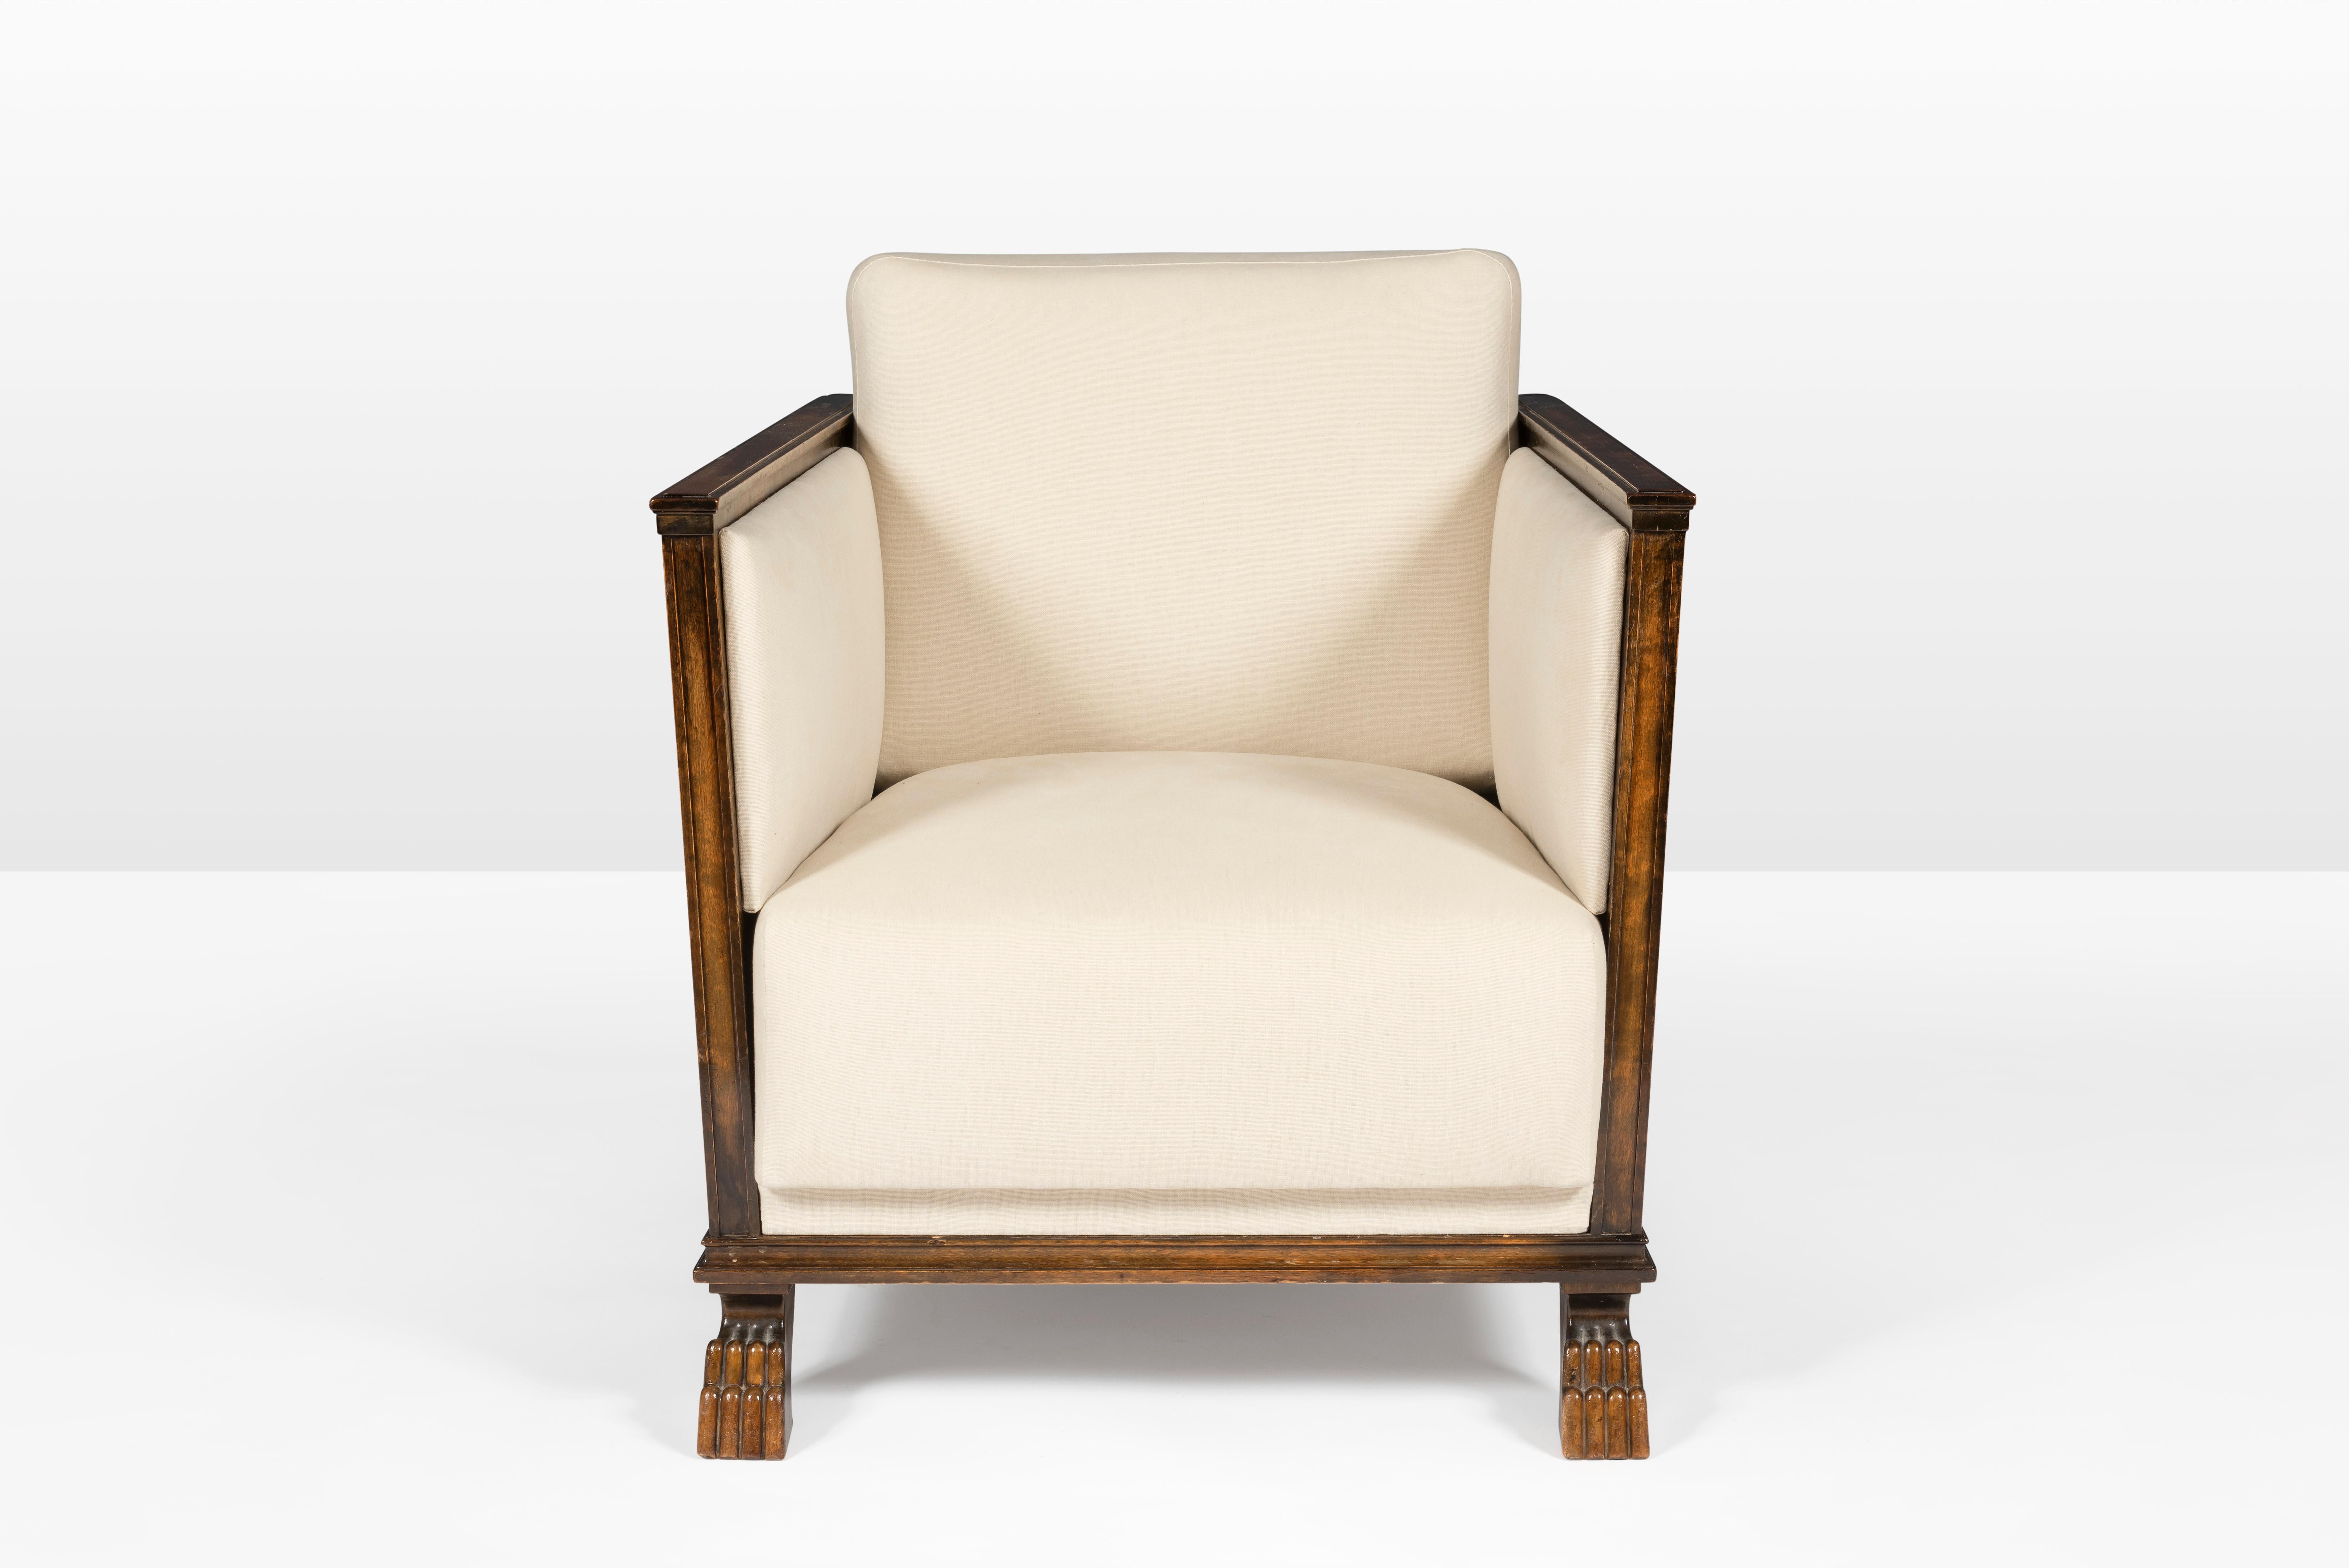 Swedish Art Deco club chair made by Axel Einar Hjorth circa 1920s-1930s for Bodafors of Sweden. Constructed from Flamed birch in Hjorth's iconic design style of strong lines and geometric patterns. It has a unique paint in honey gold and brown hues.